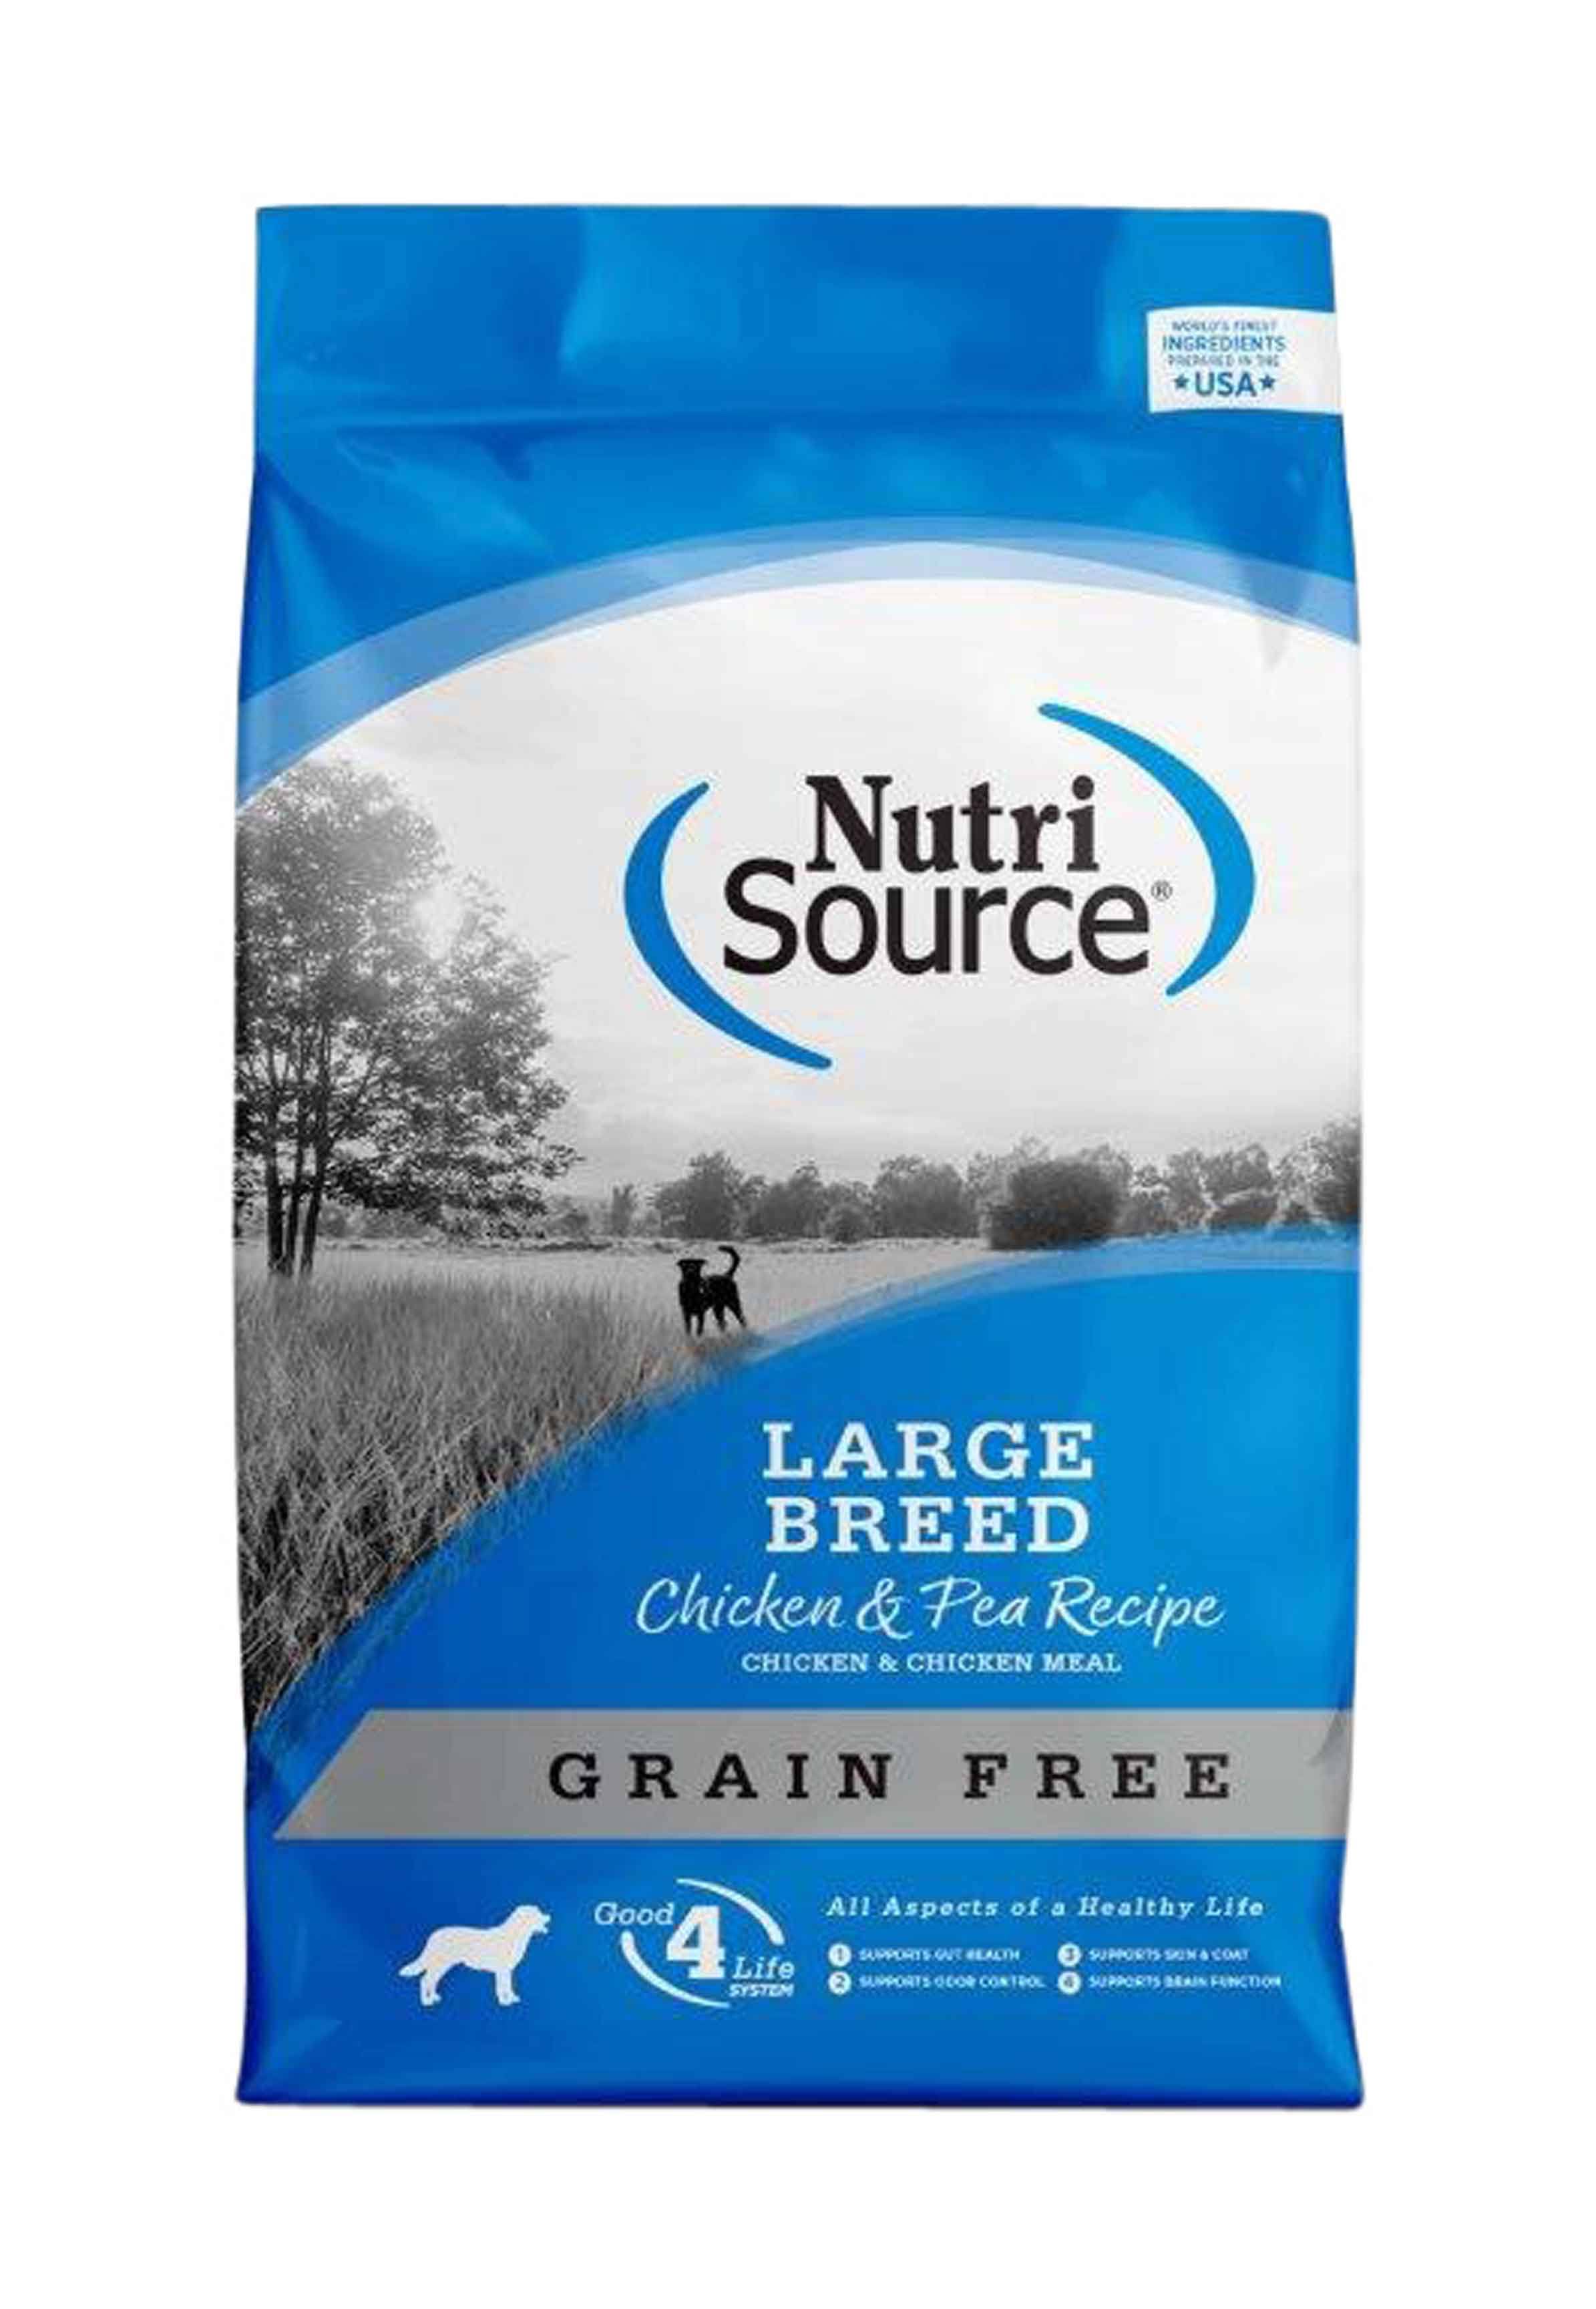 NutriSource Large Breed Grain-Free Chicken & Pea Dog Food, 30 lbs